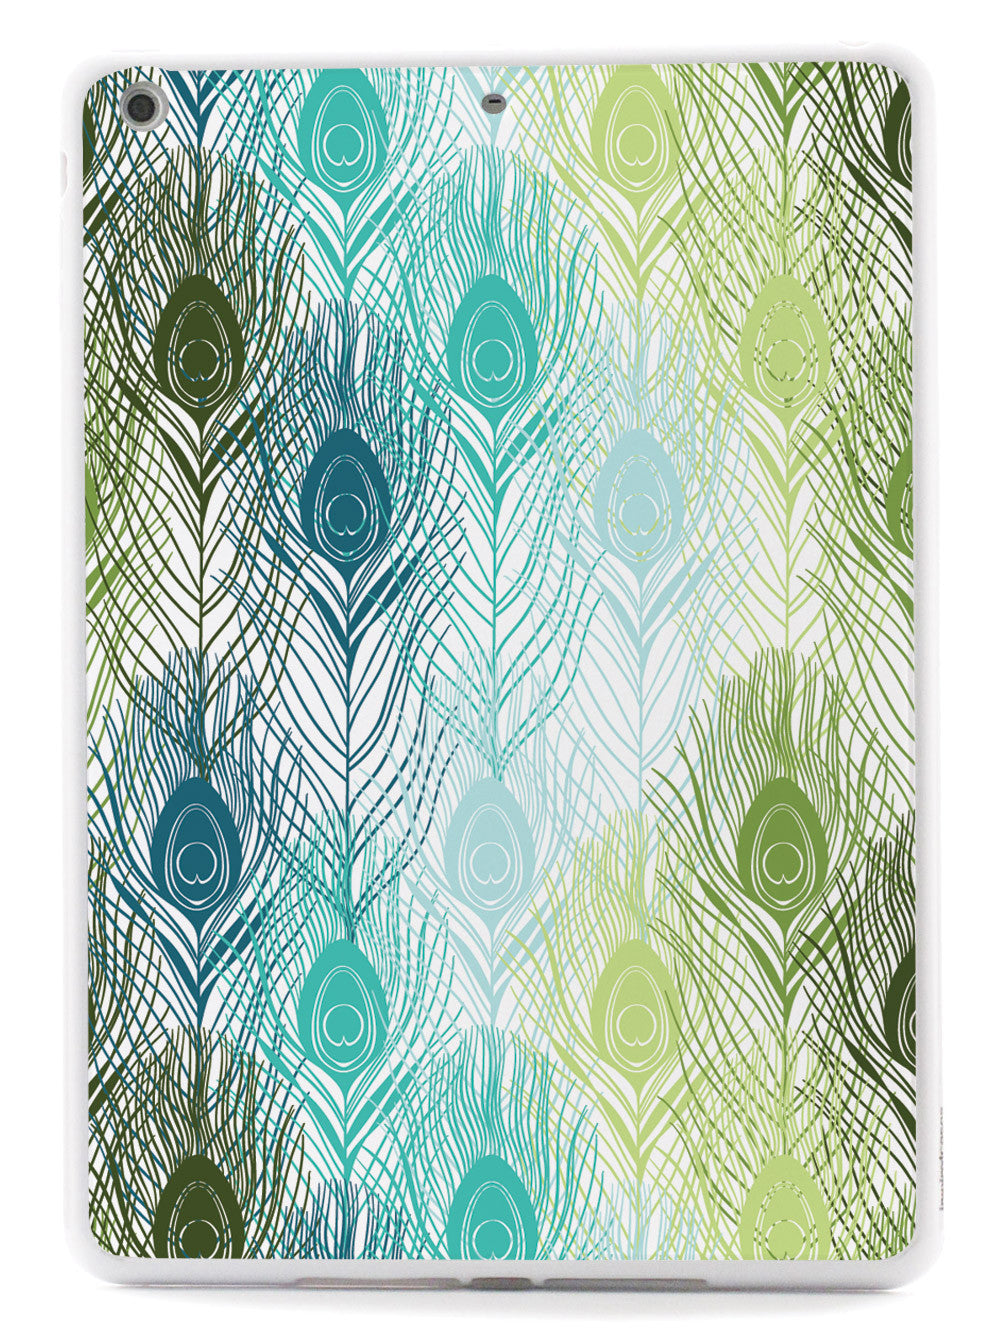 Peacock Feather Pattern - Green and Blue Case